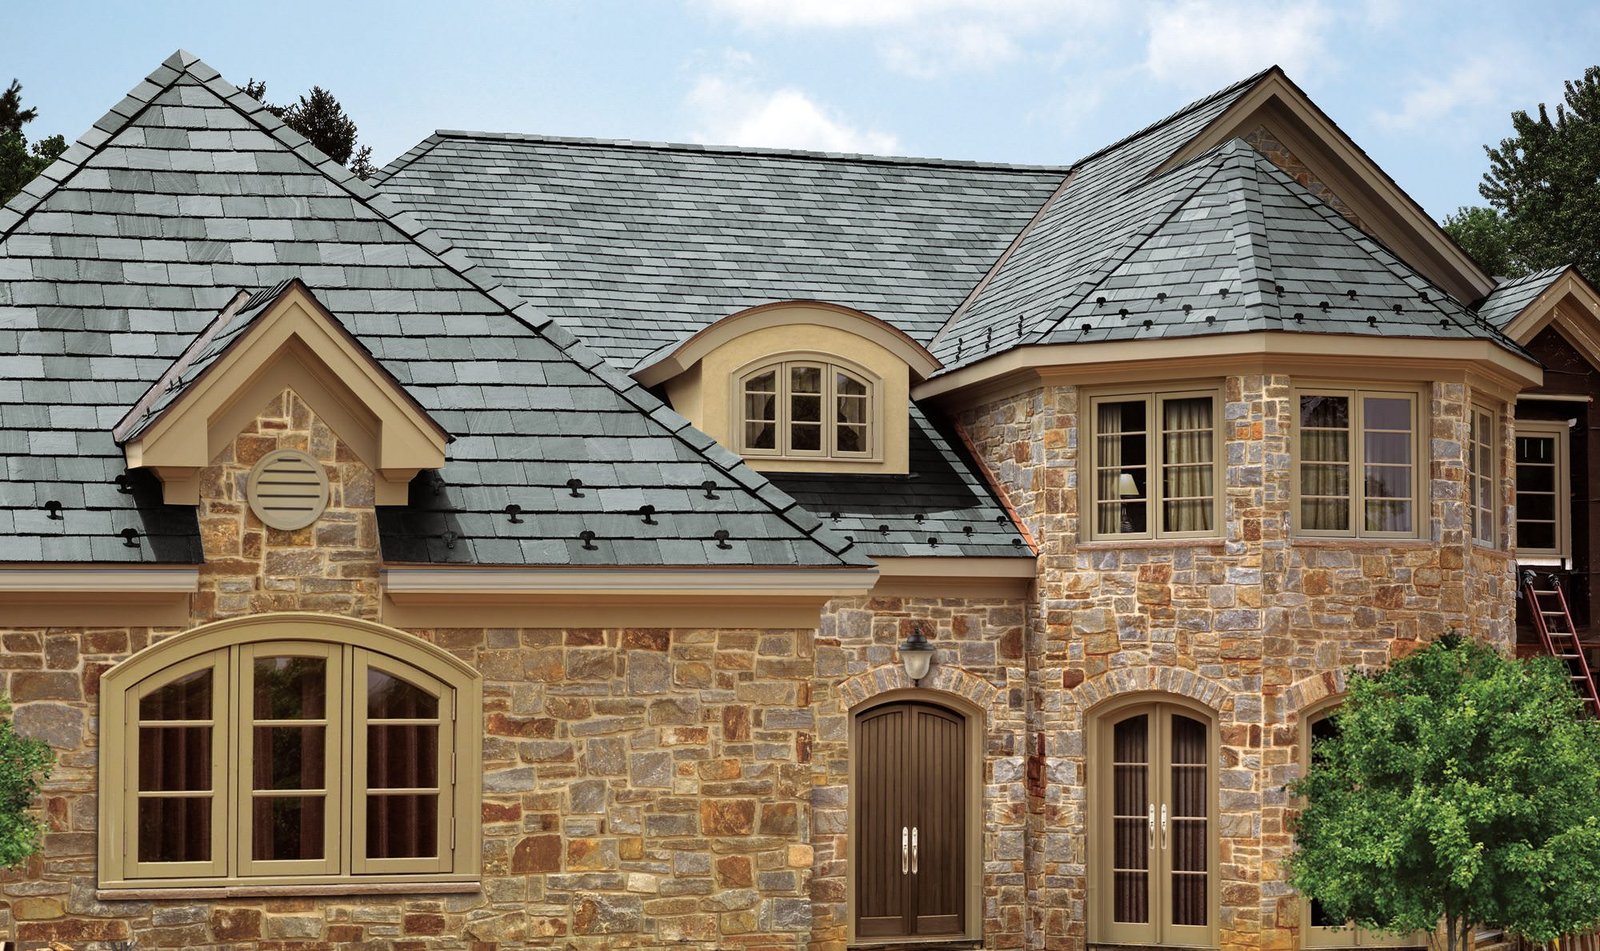 Slate. It’s the most beautiful and durable roofing material known to man.